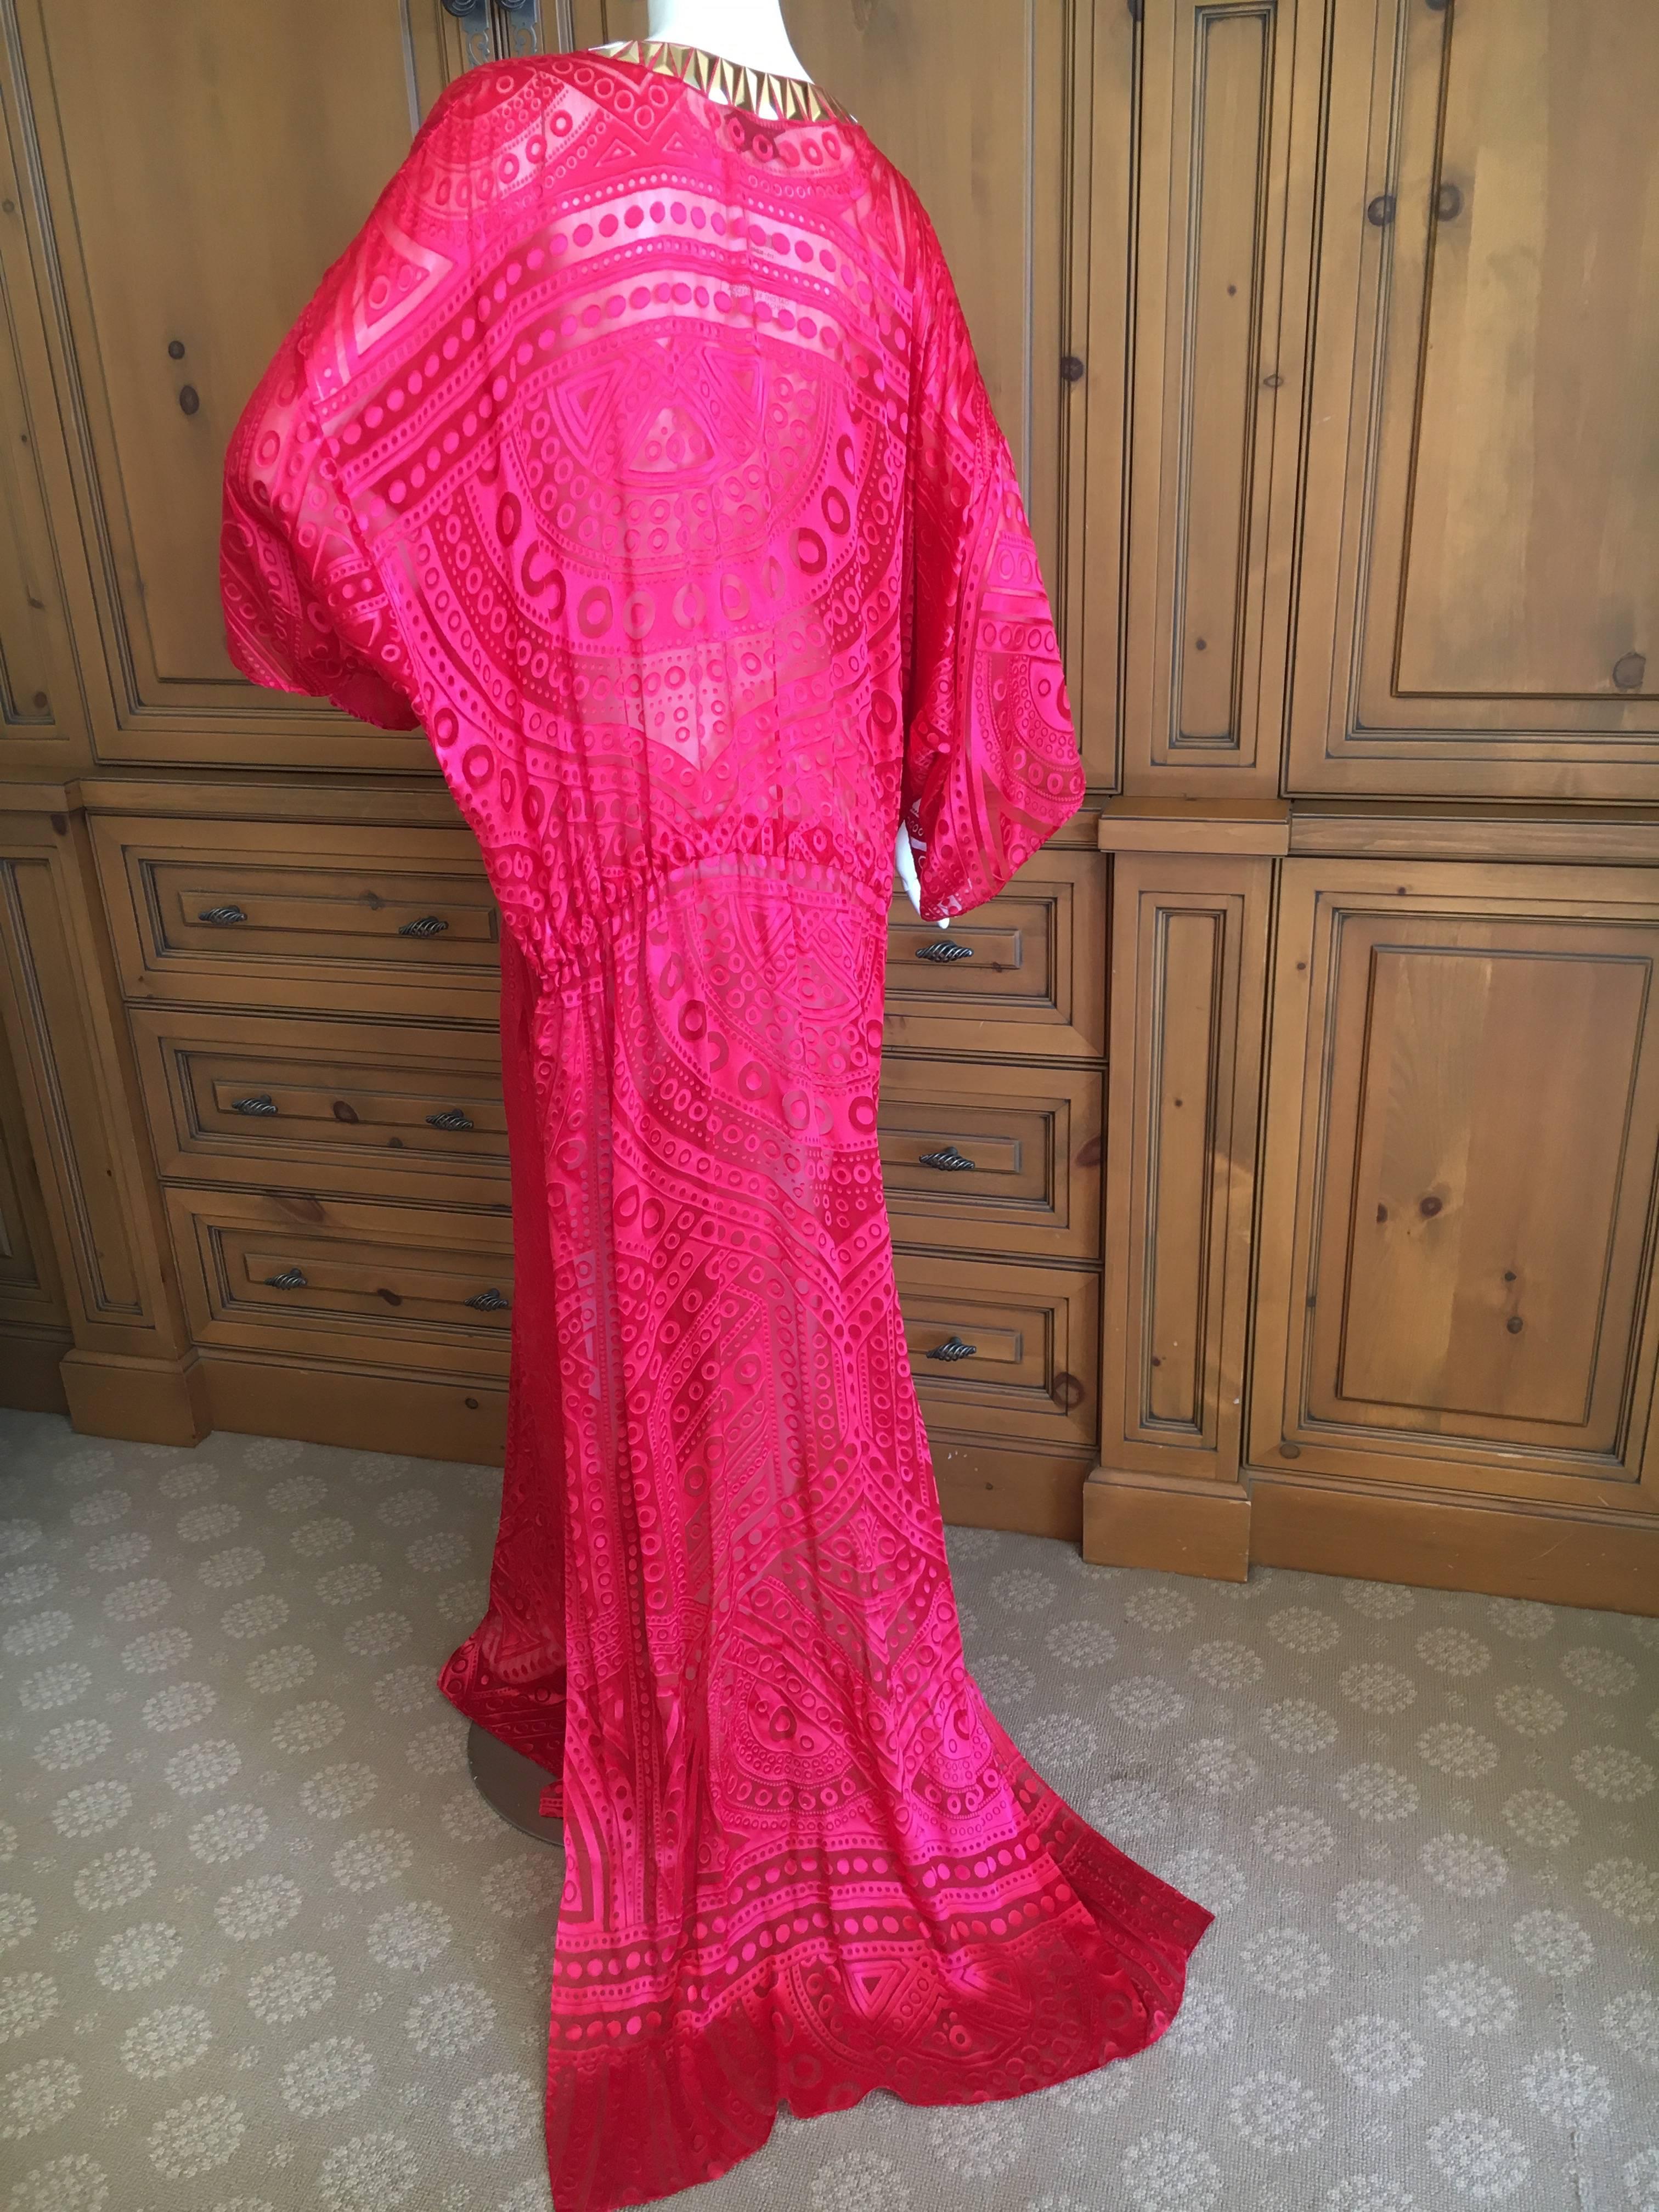 Roberto Cavalli Sheer Red Caftan with Gold Embellishents for Just Cavalli NWT 1